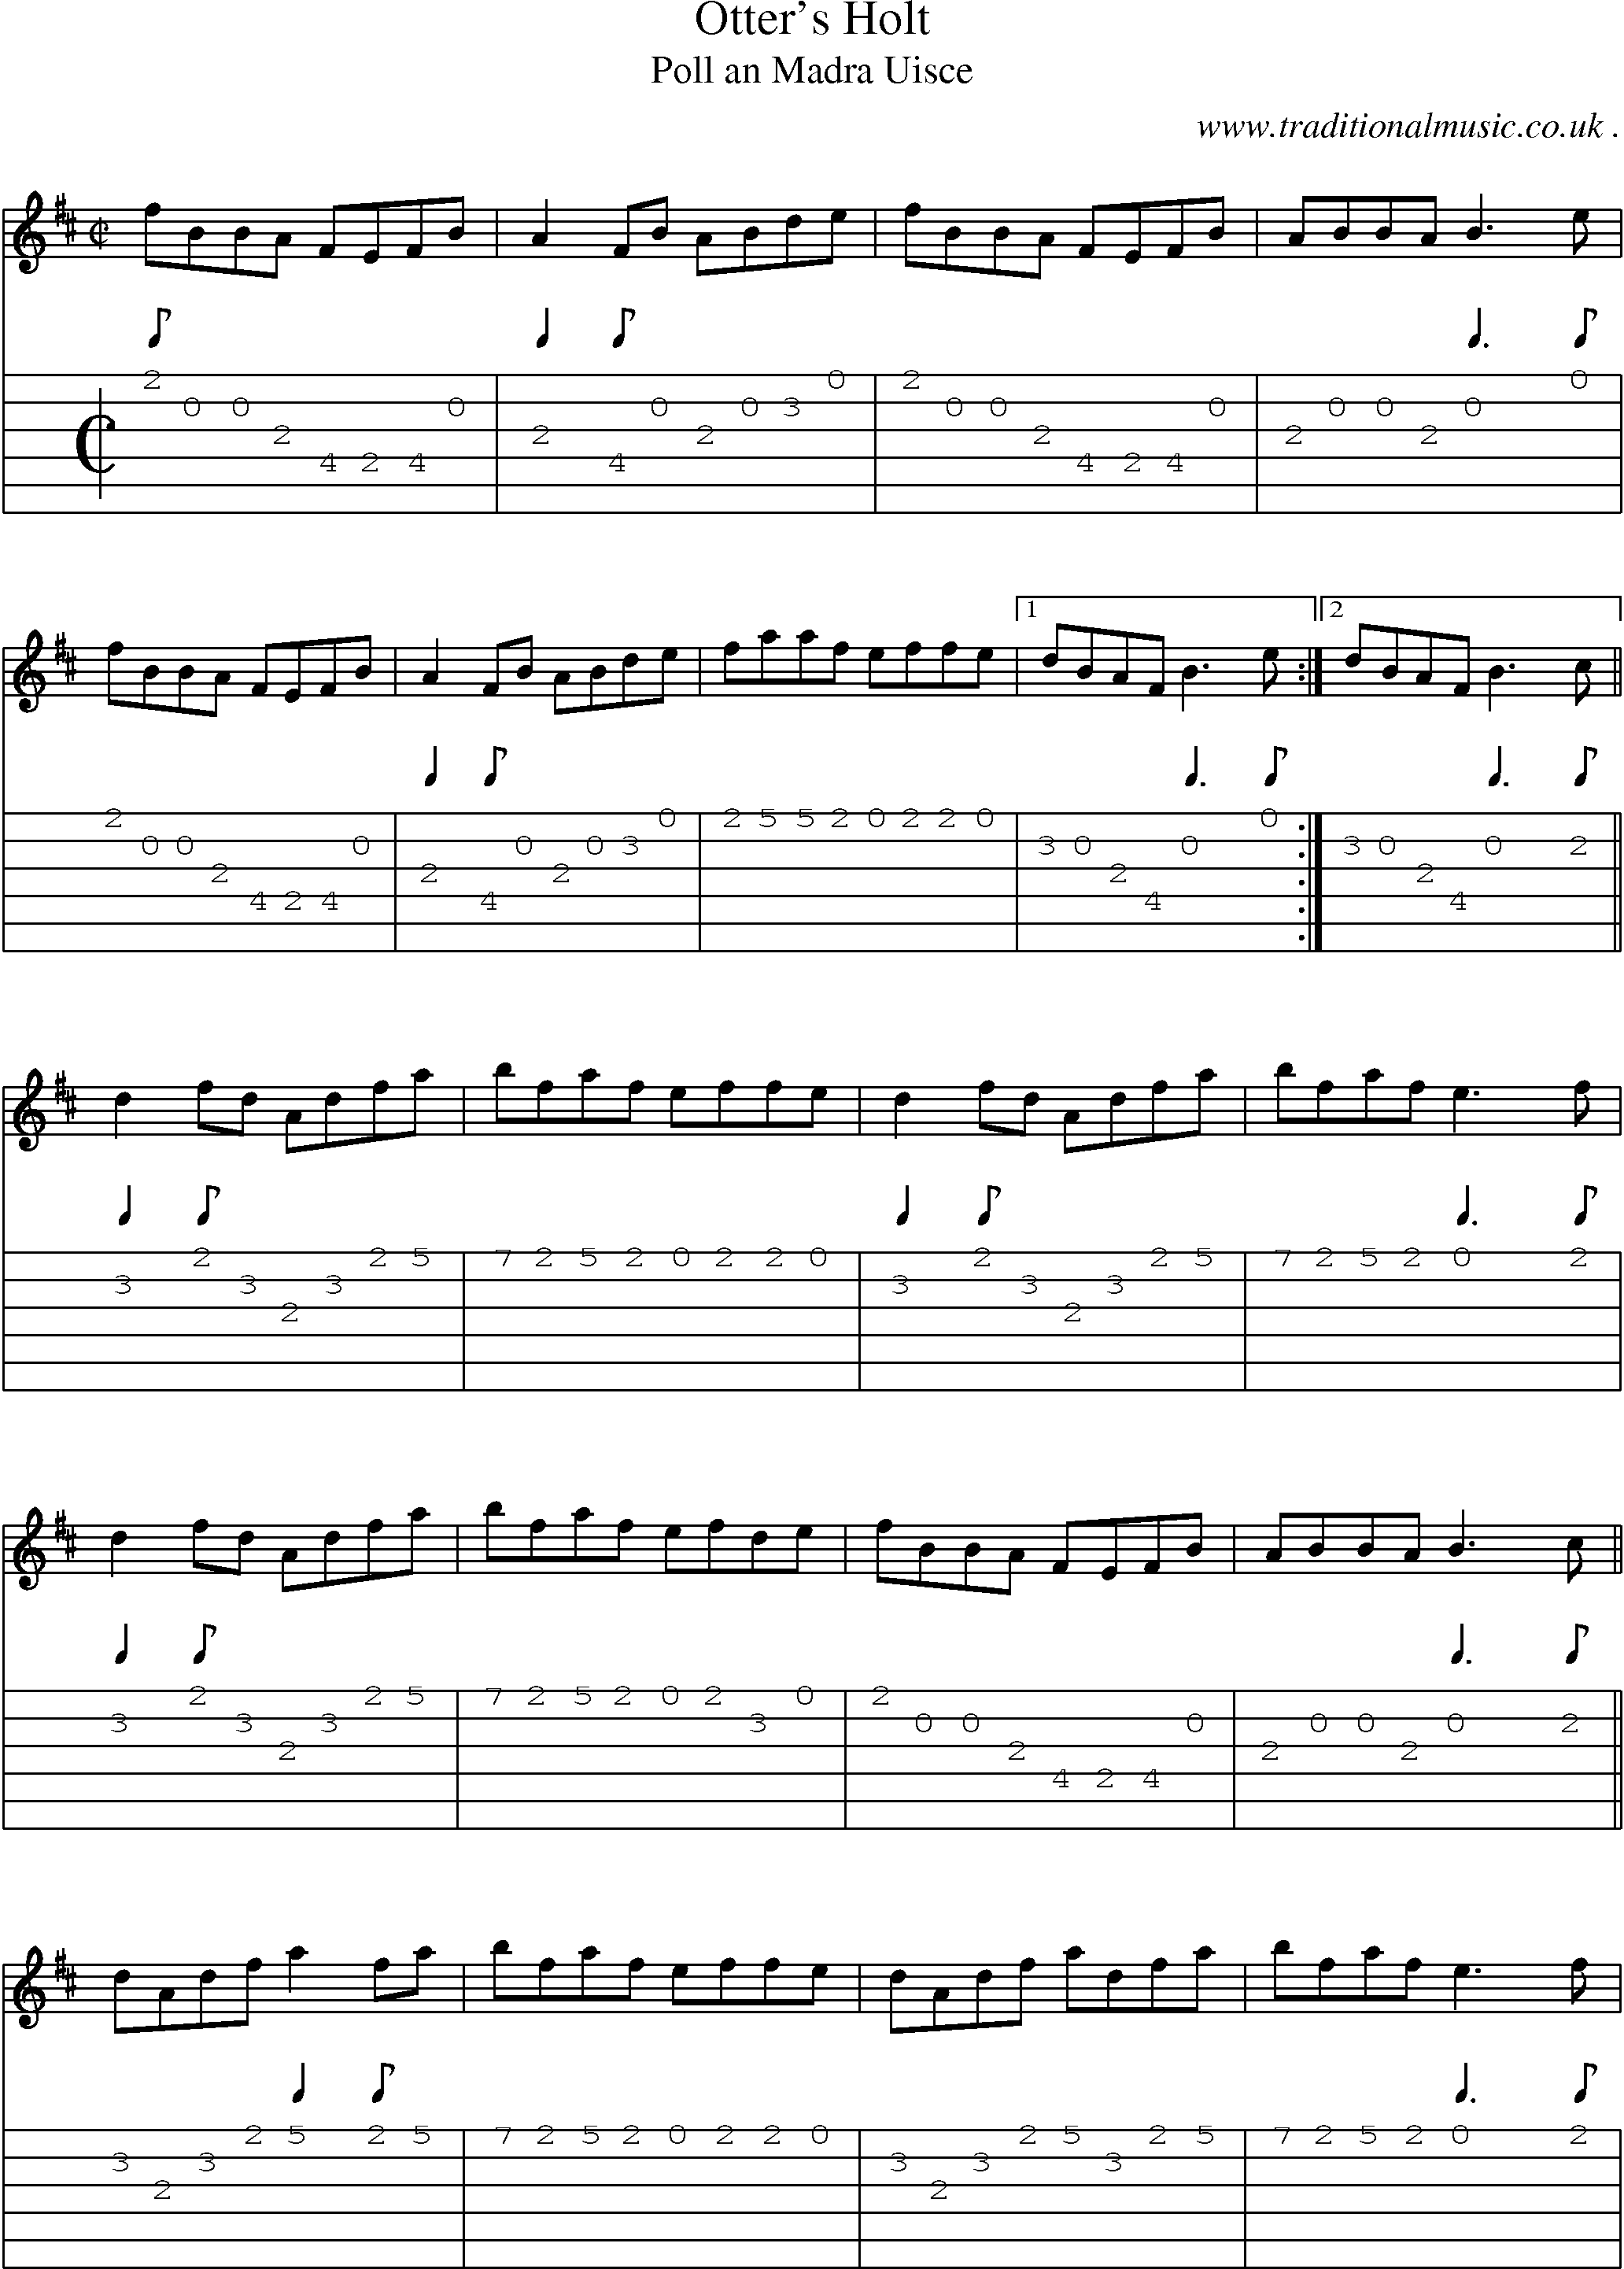 Sheet-Music and Guitar Tabs for Otters Holt